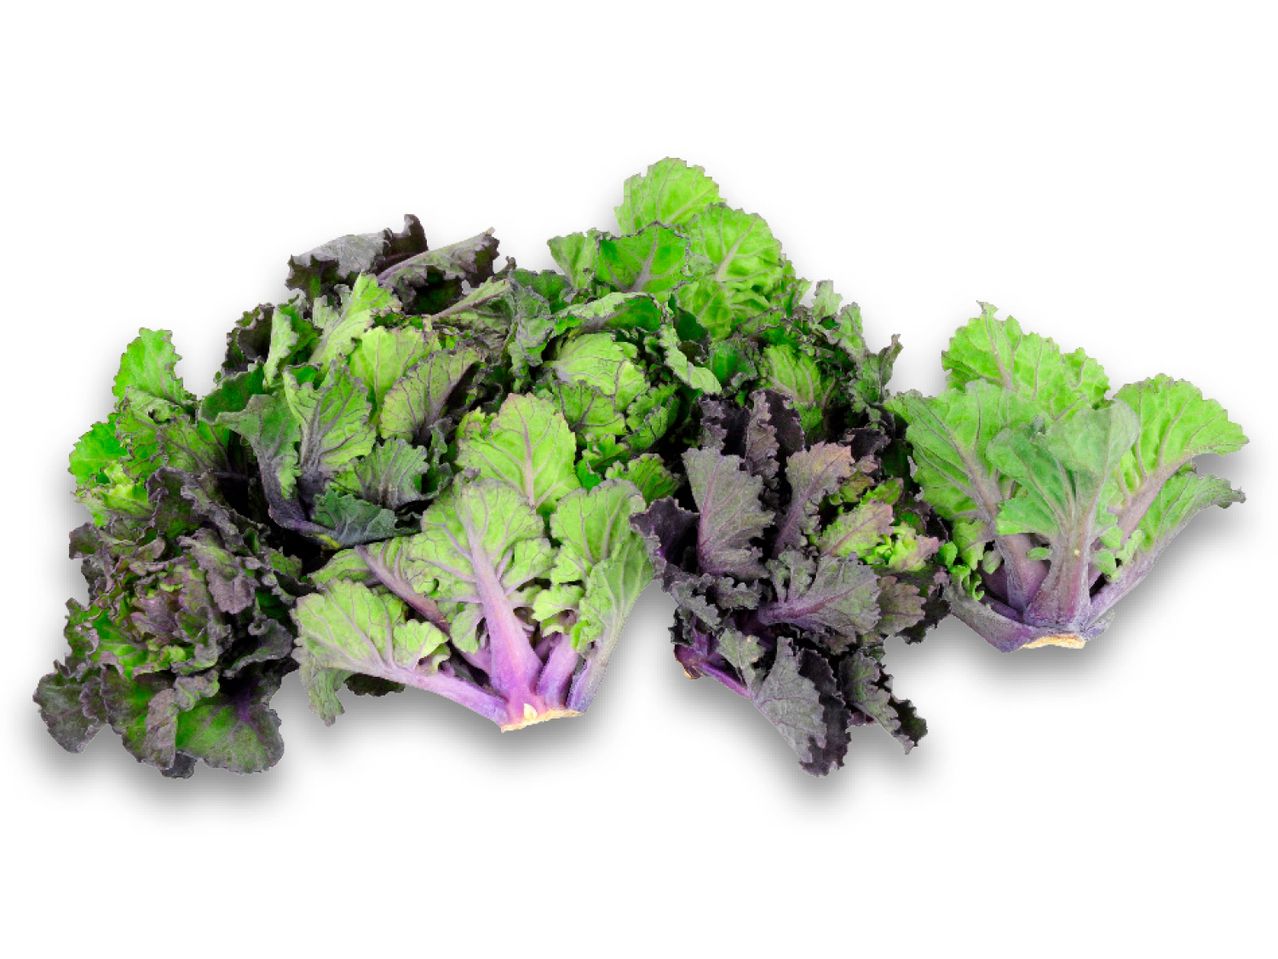 Go to full screen view: Kale - Image 1